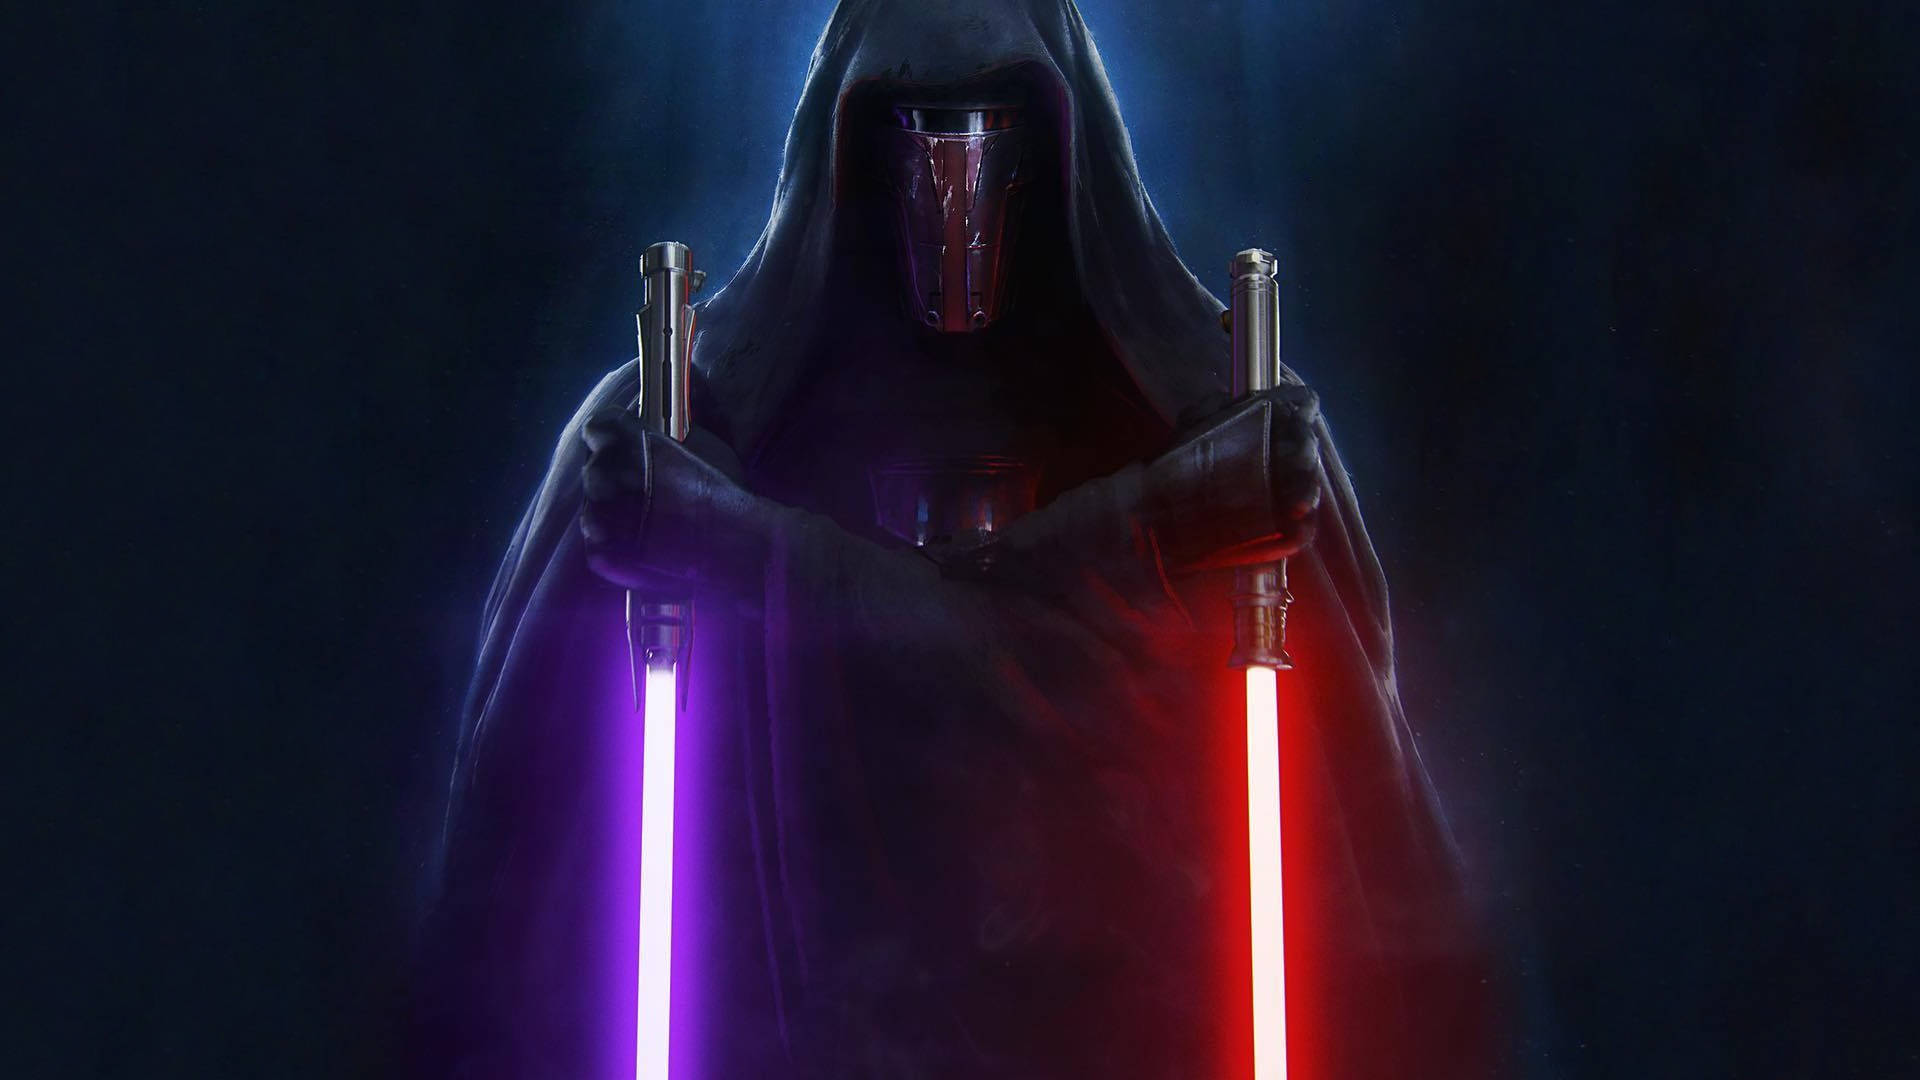 Revan holds the destiny of the galaxy in his hands Wallpaper